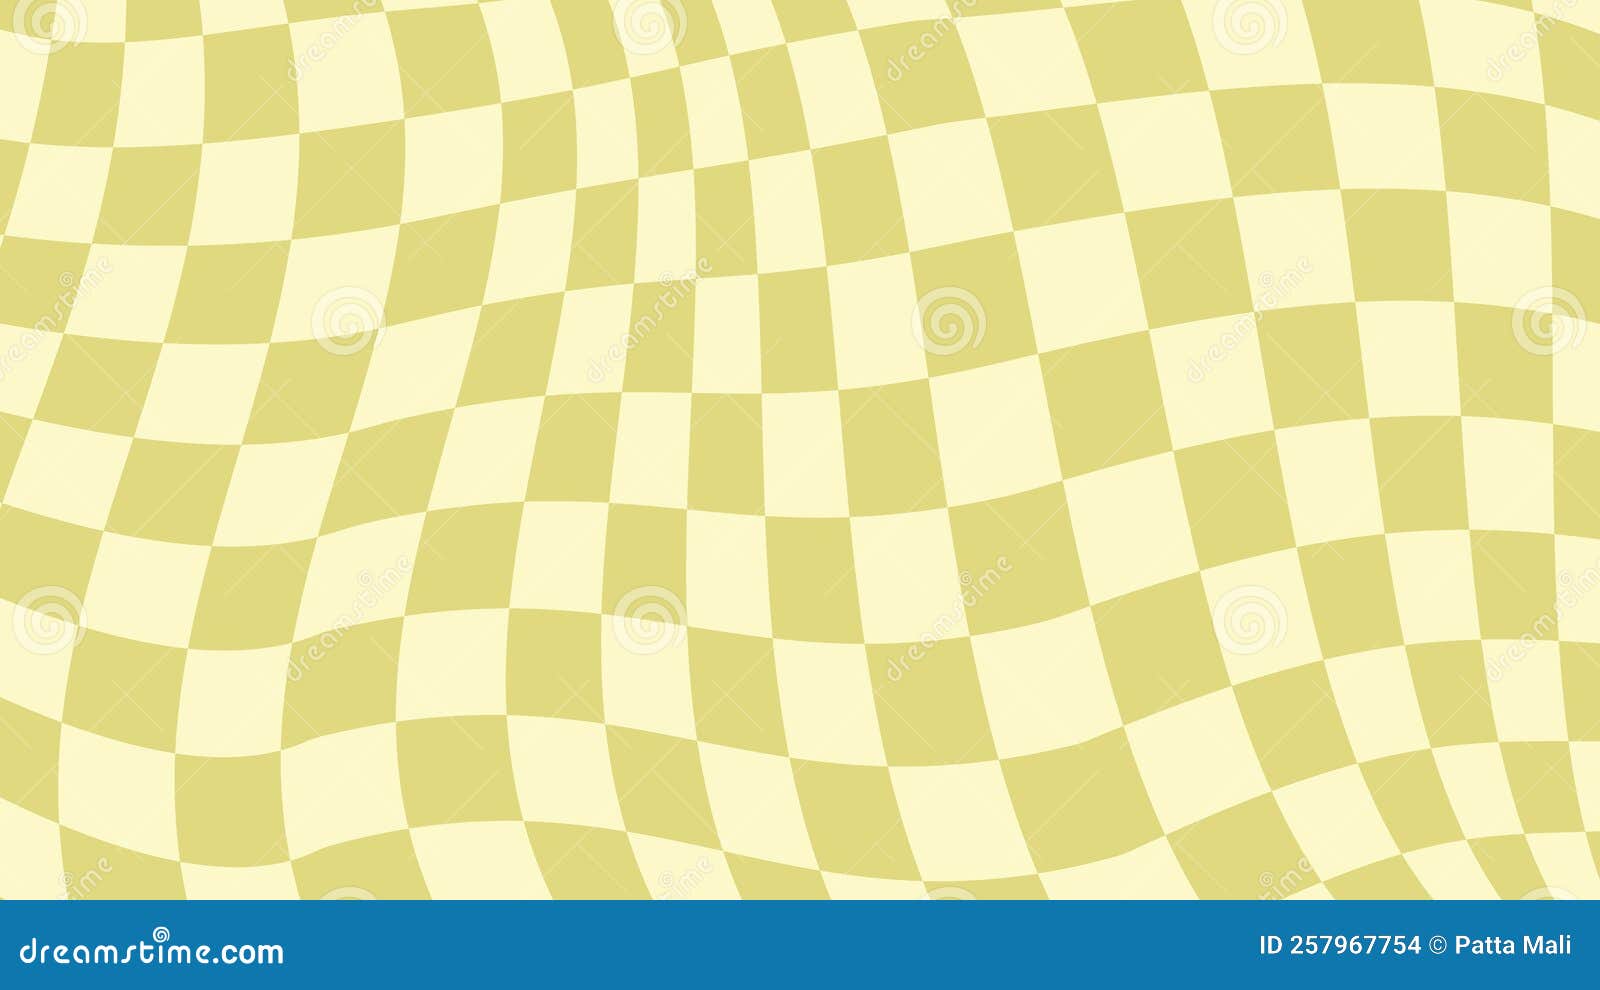 Checkered tile pattern or blue and white wallpaper